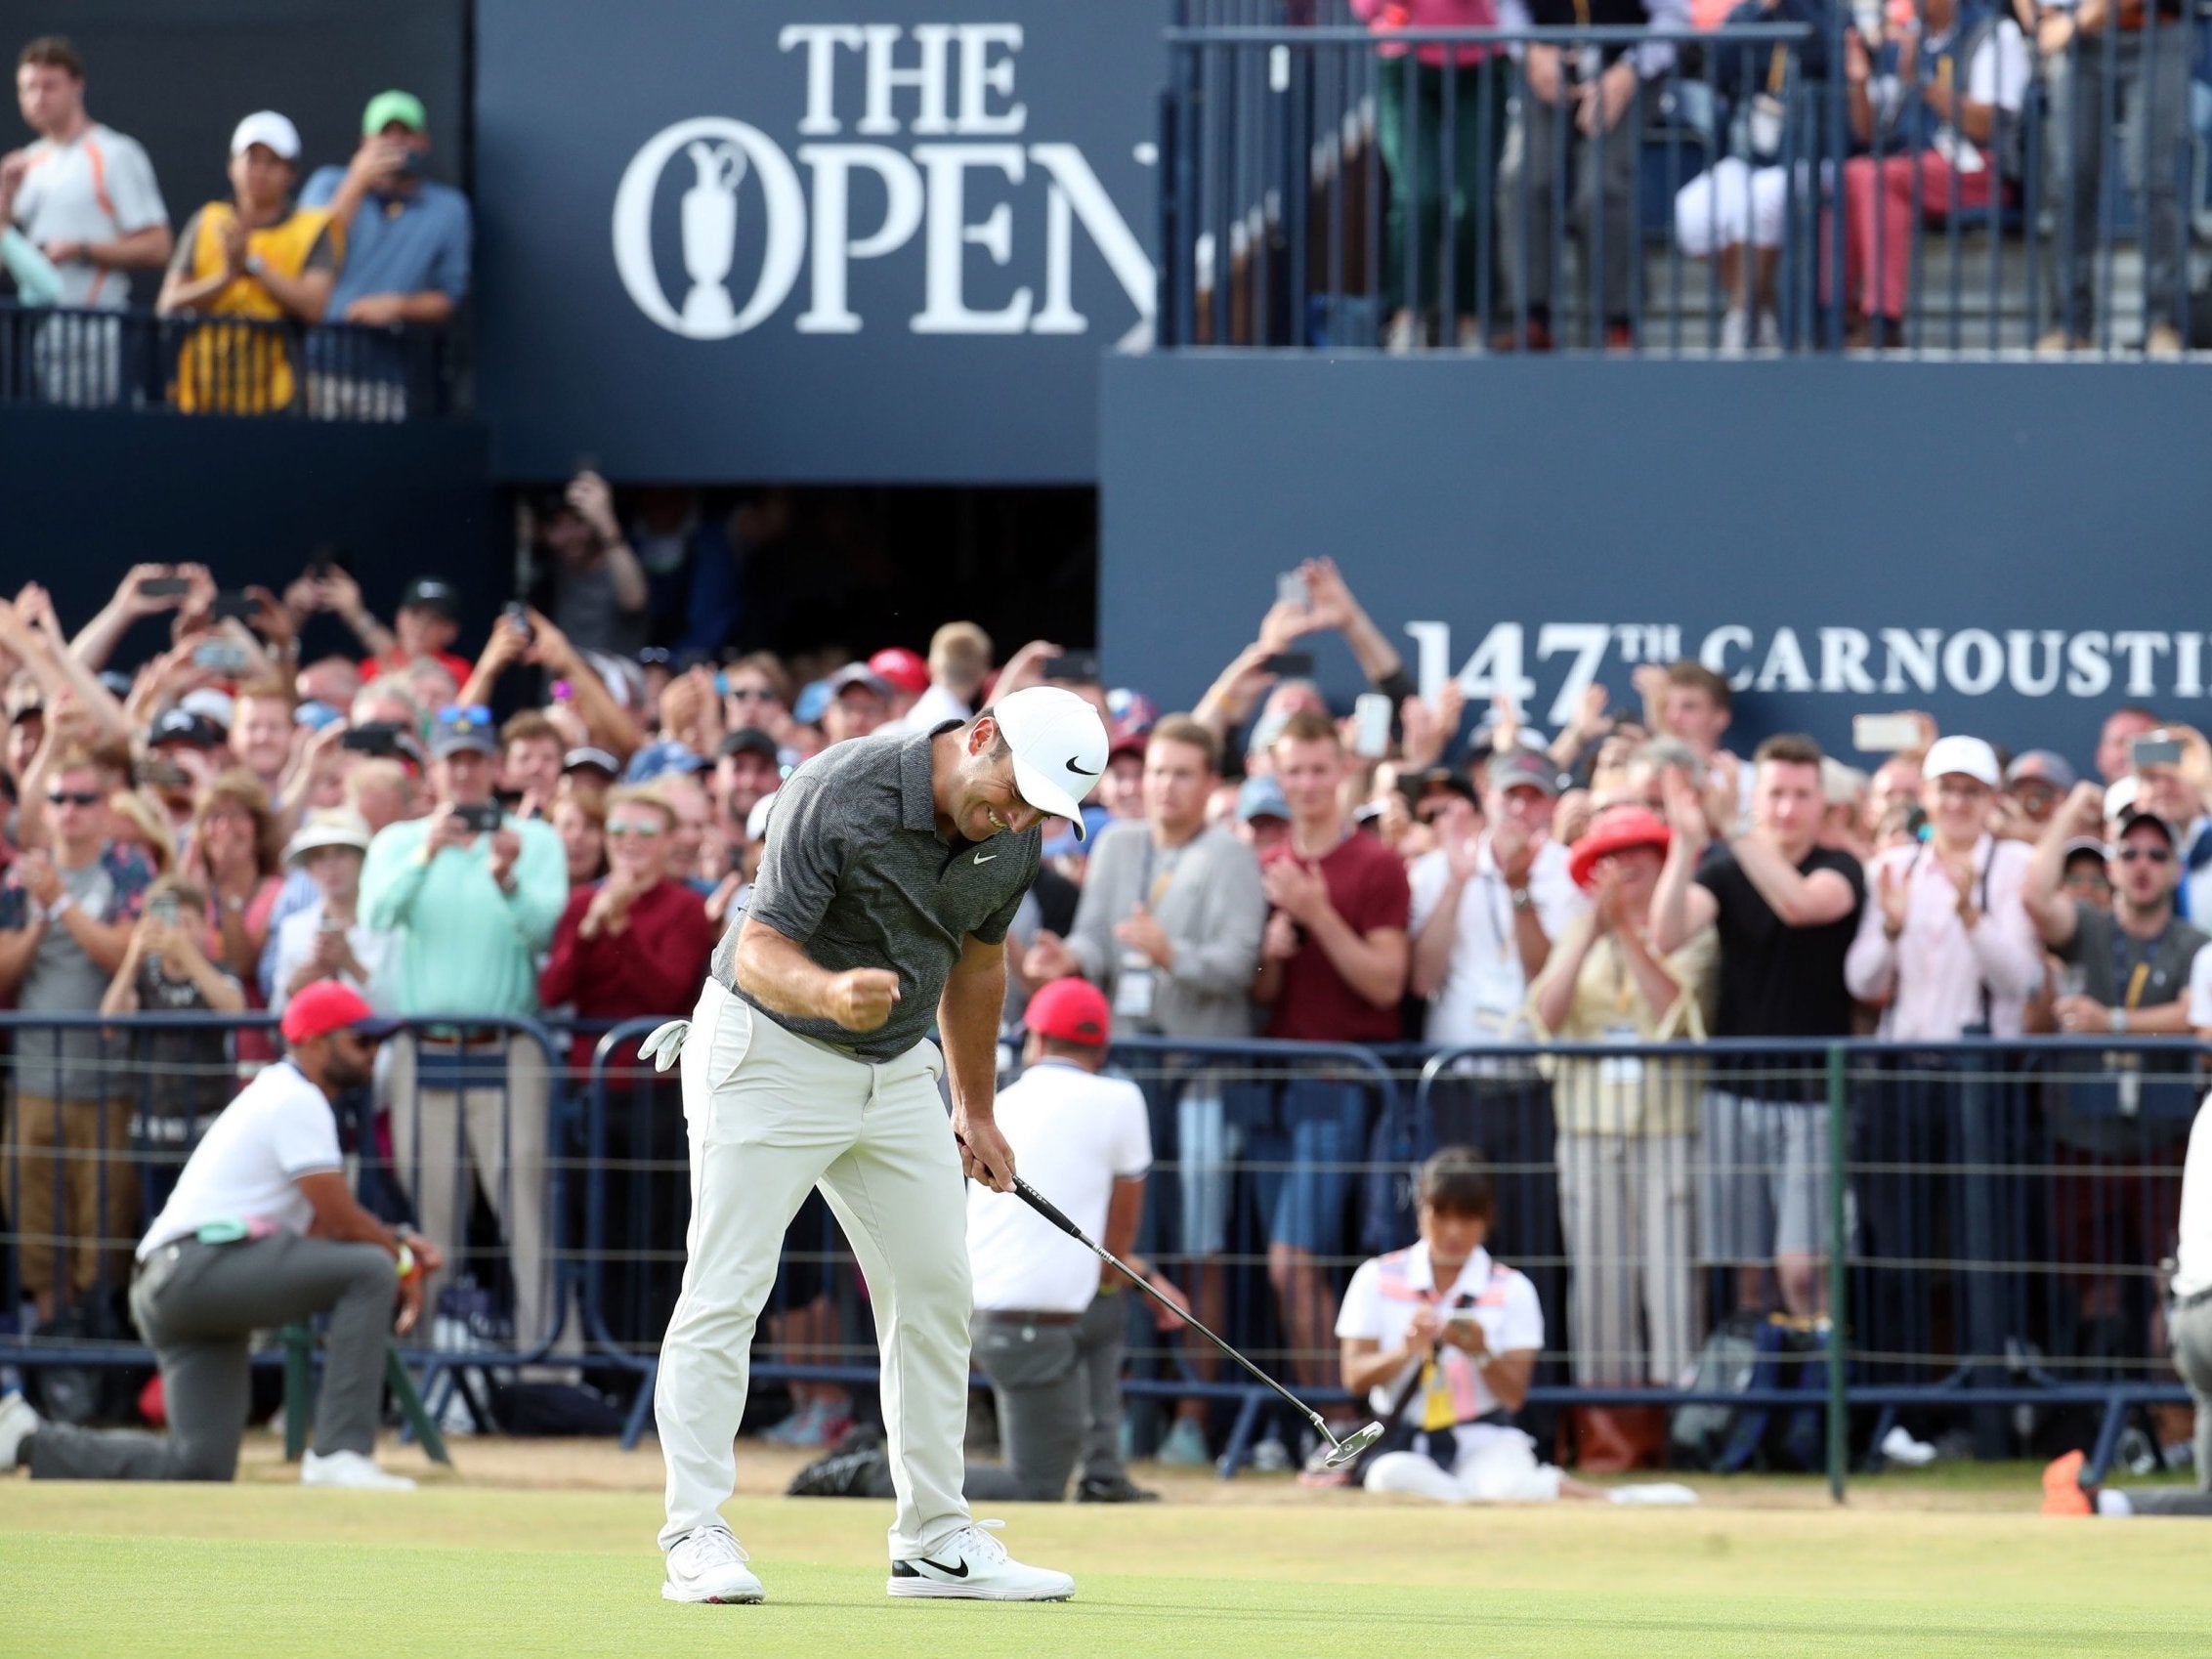 The Open at Carnoustie boosted the Scottish economy by £120m